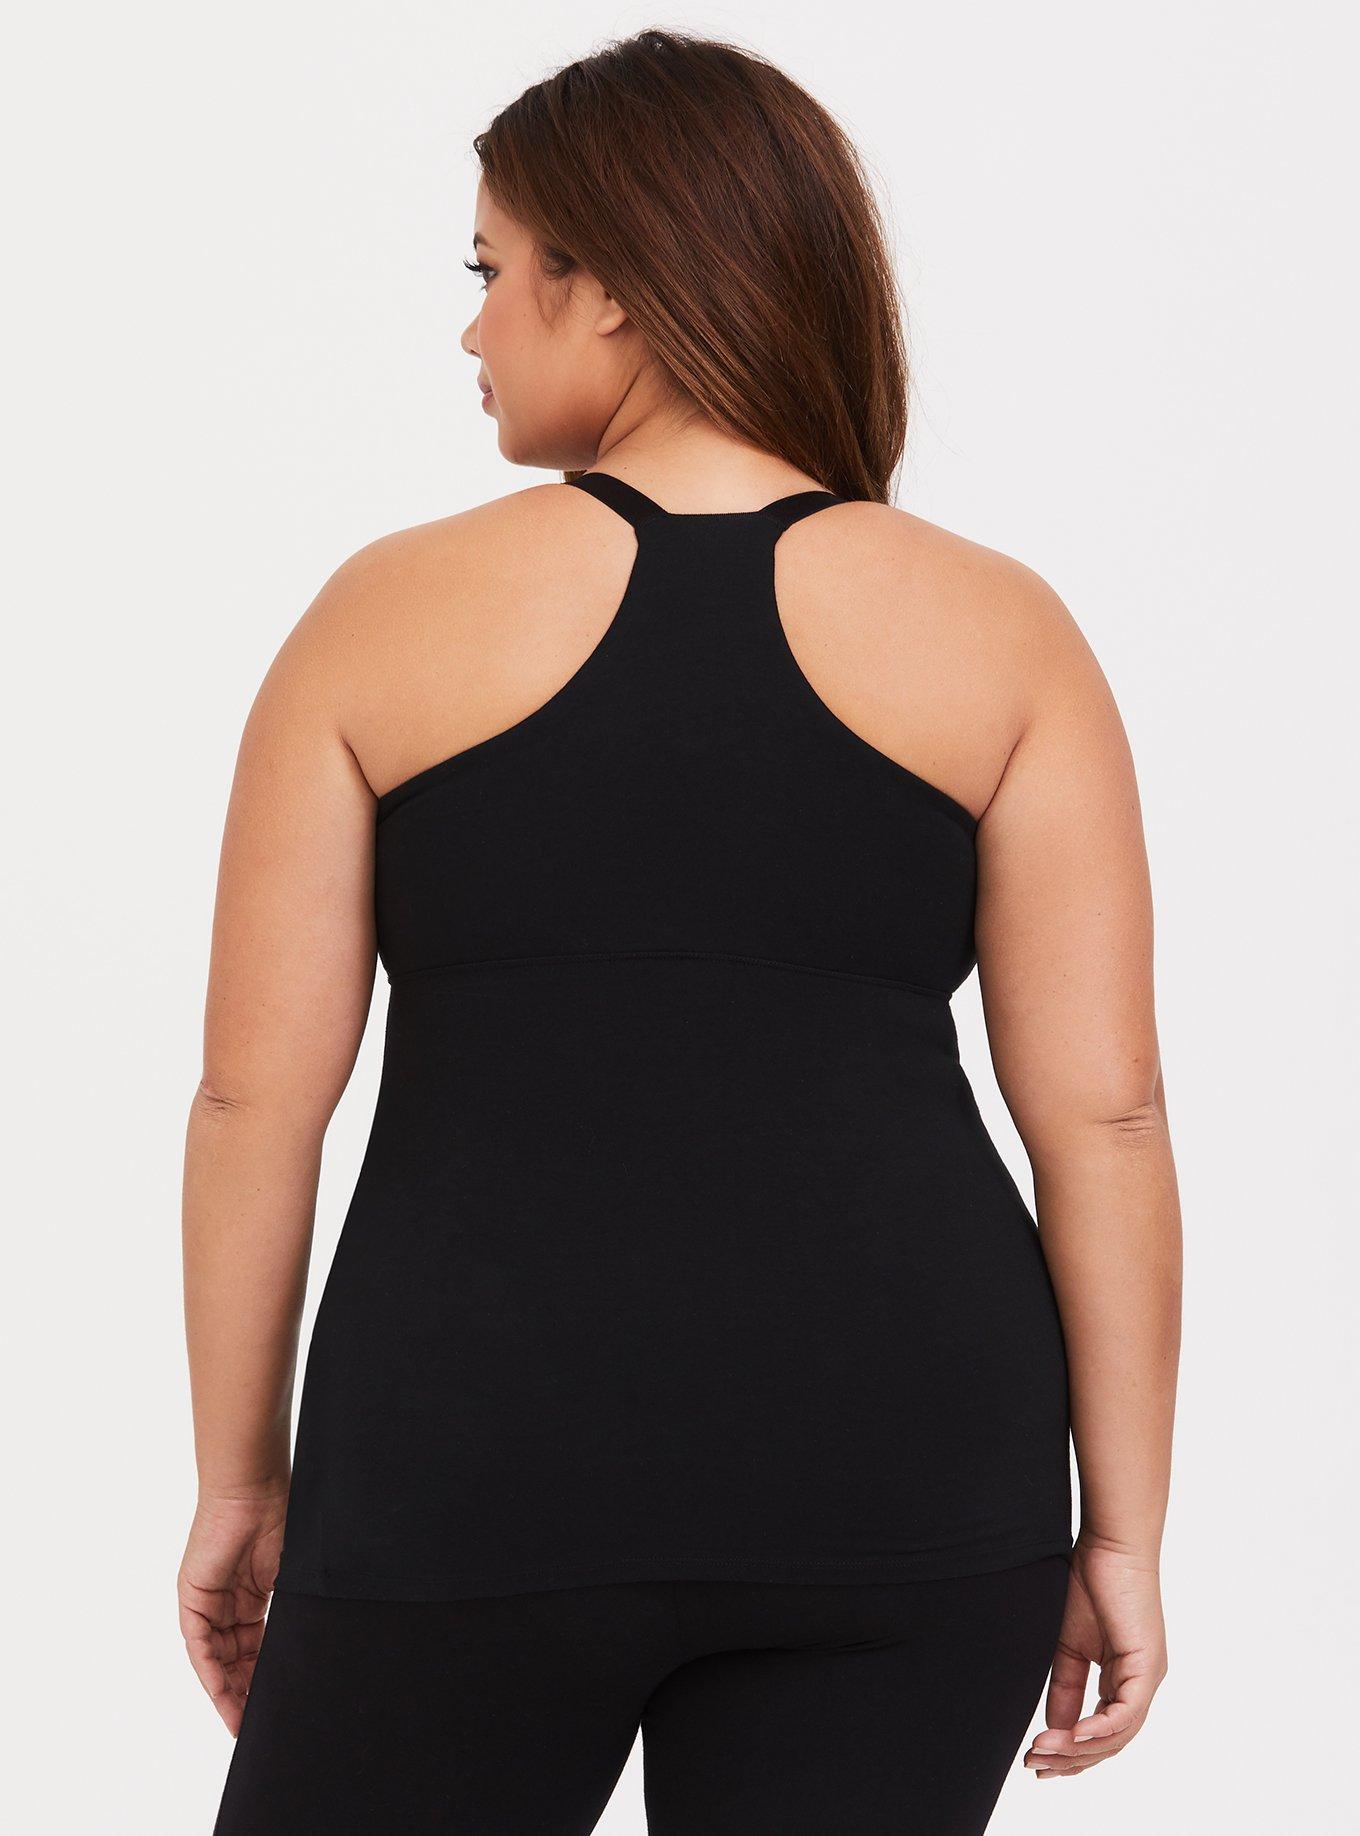 Torrid Plus Size Women's Clothing for sale in Kanyayo, Eastern